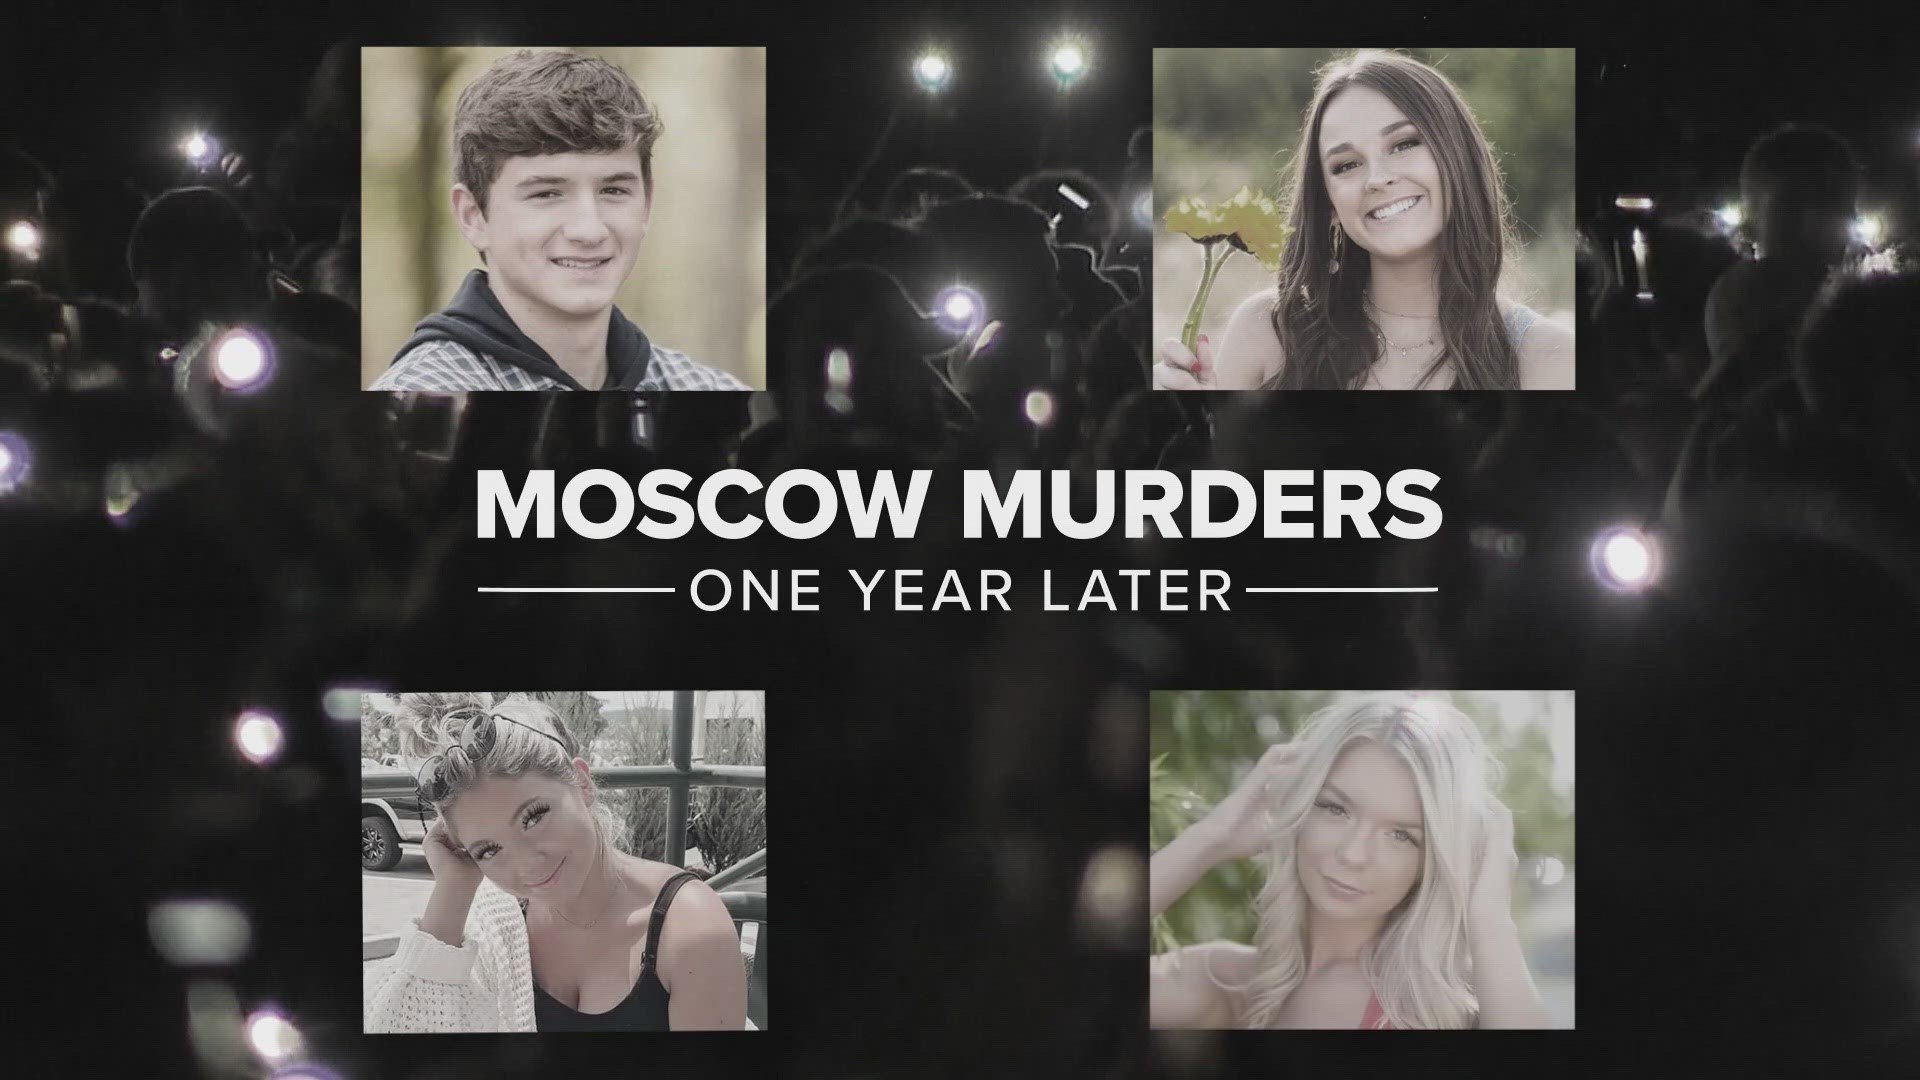 It has been one year since the murder of University of Idaho students Madison Mogen, Ethan Chapin, Xana Kernodle and Kaylee Goncalves inside their off campus home